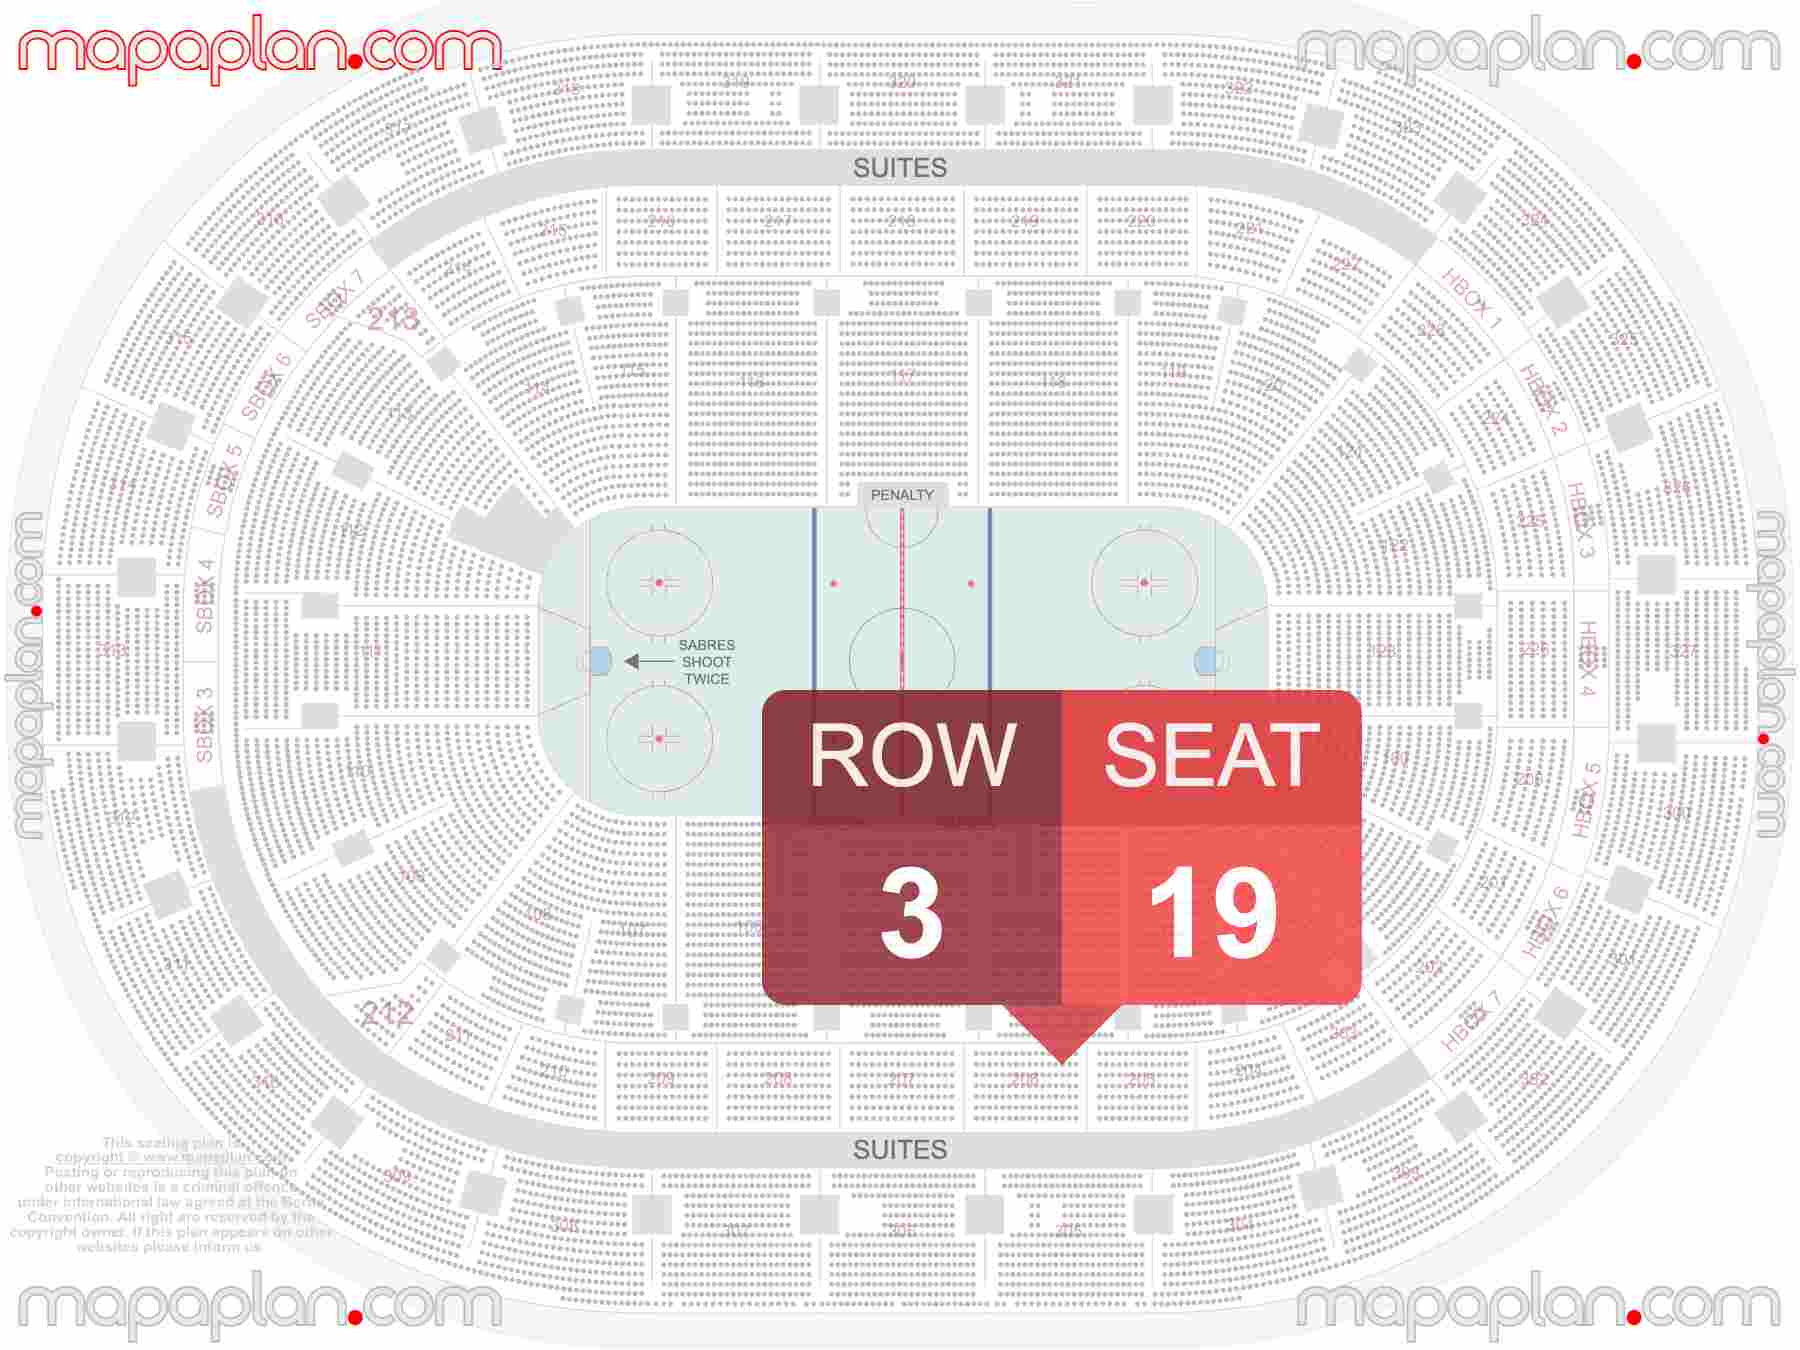 Buffalo KeyBank Center seating chart Sabres hockey inside capacity view arrangement plan - Interactive virtual 3d best seats & rows detailed stadium image configuration layout